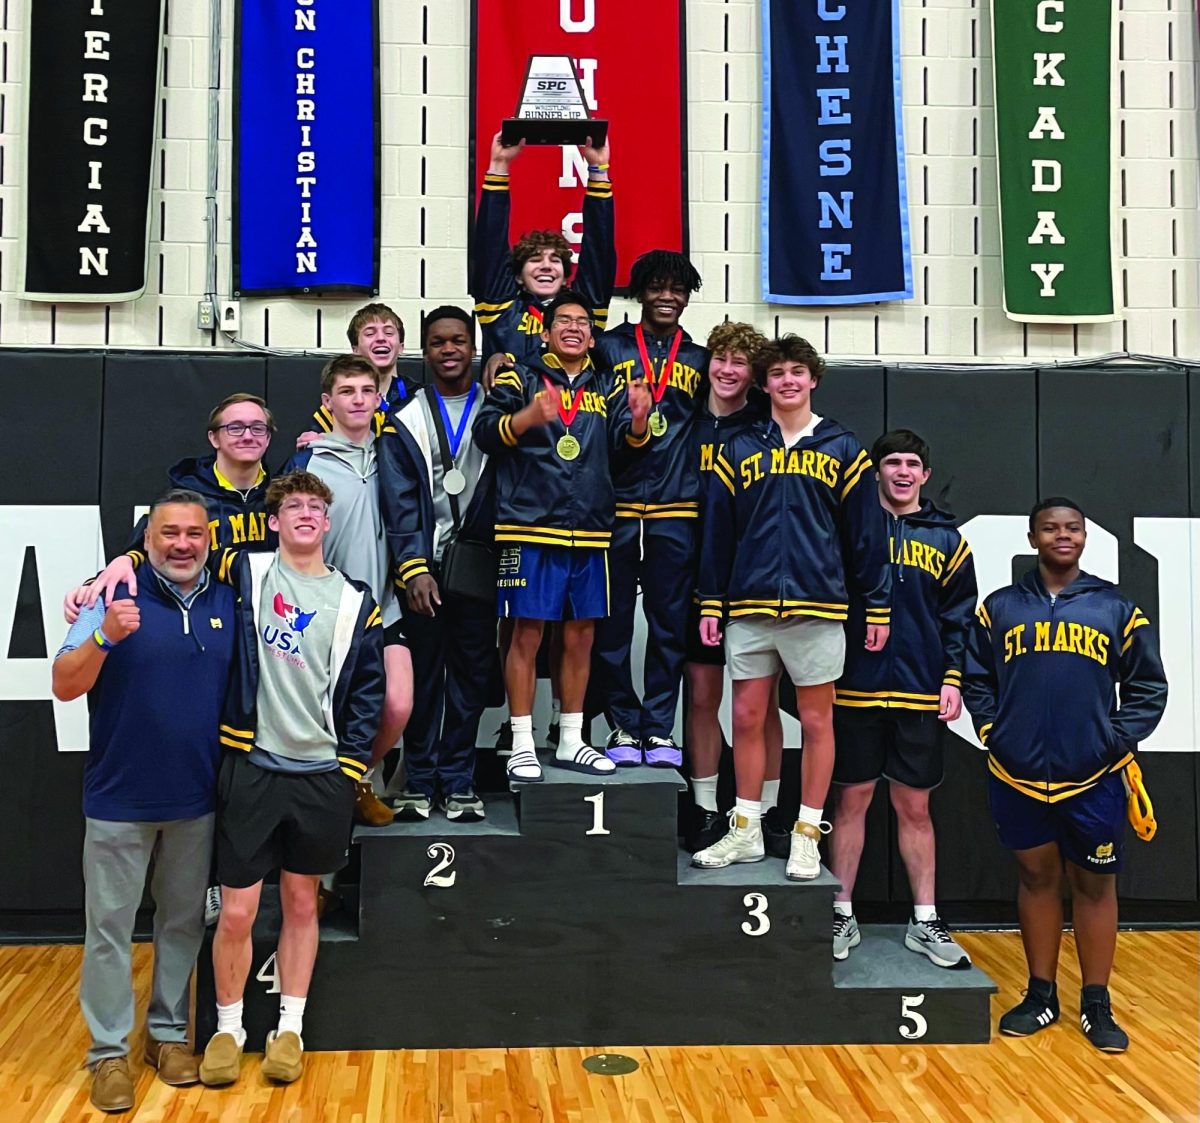 PODIUM+The+Lions+wrestling+team+takes+a+picture+on+the+SPC+podium%2C+with+many+wrestlers+wearing+their+medals+from+a+successful+tournament.